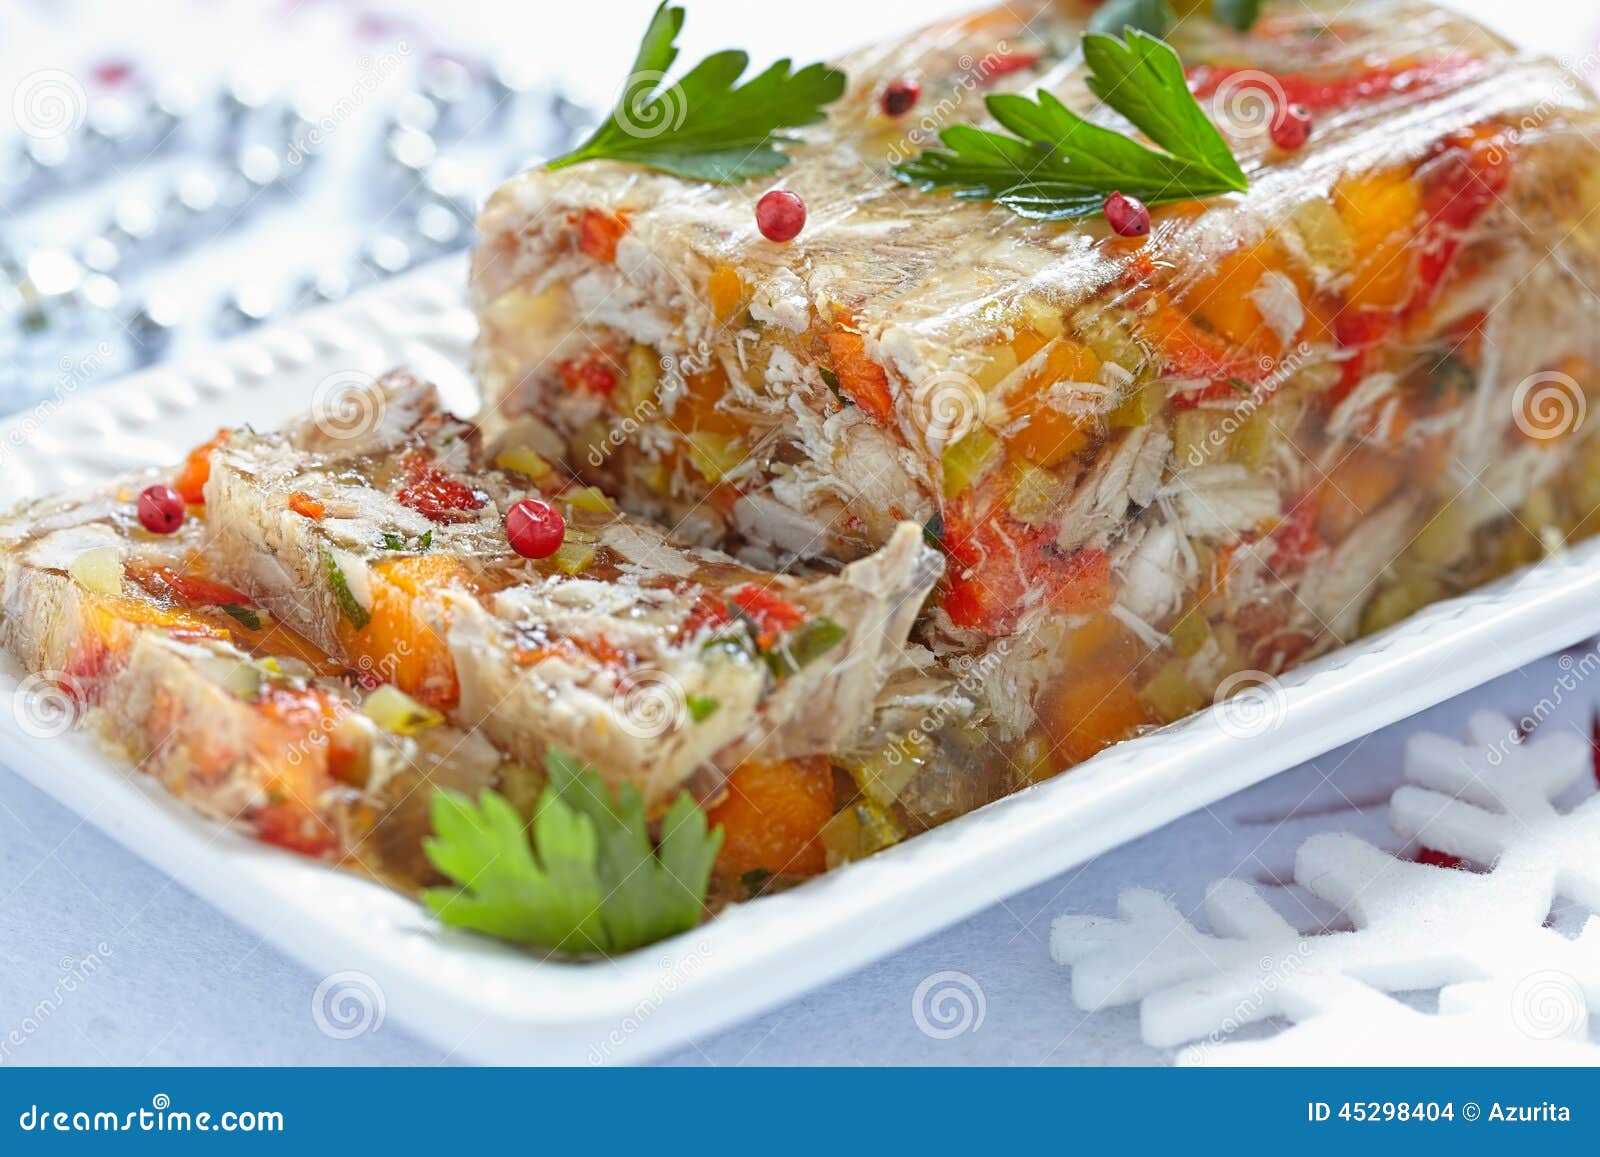 Rabbit Galantine with Vegetables Stock Photo - Image of dukan, healthy ...